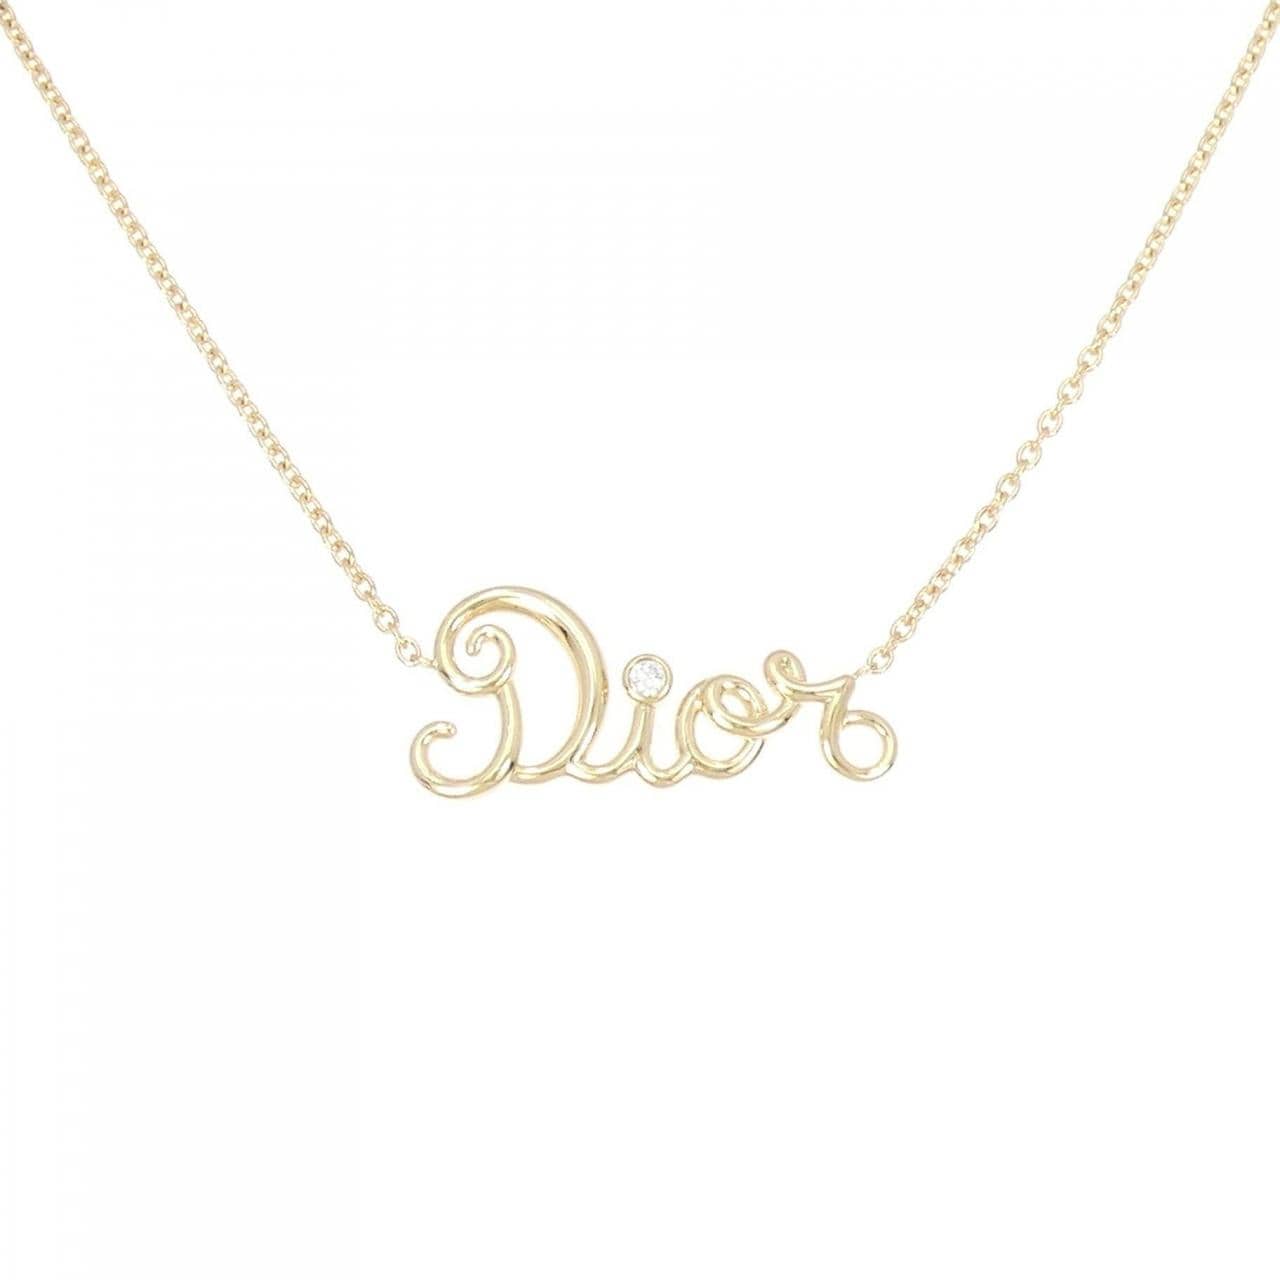 Christian DIOR DIOR Amour necklace